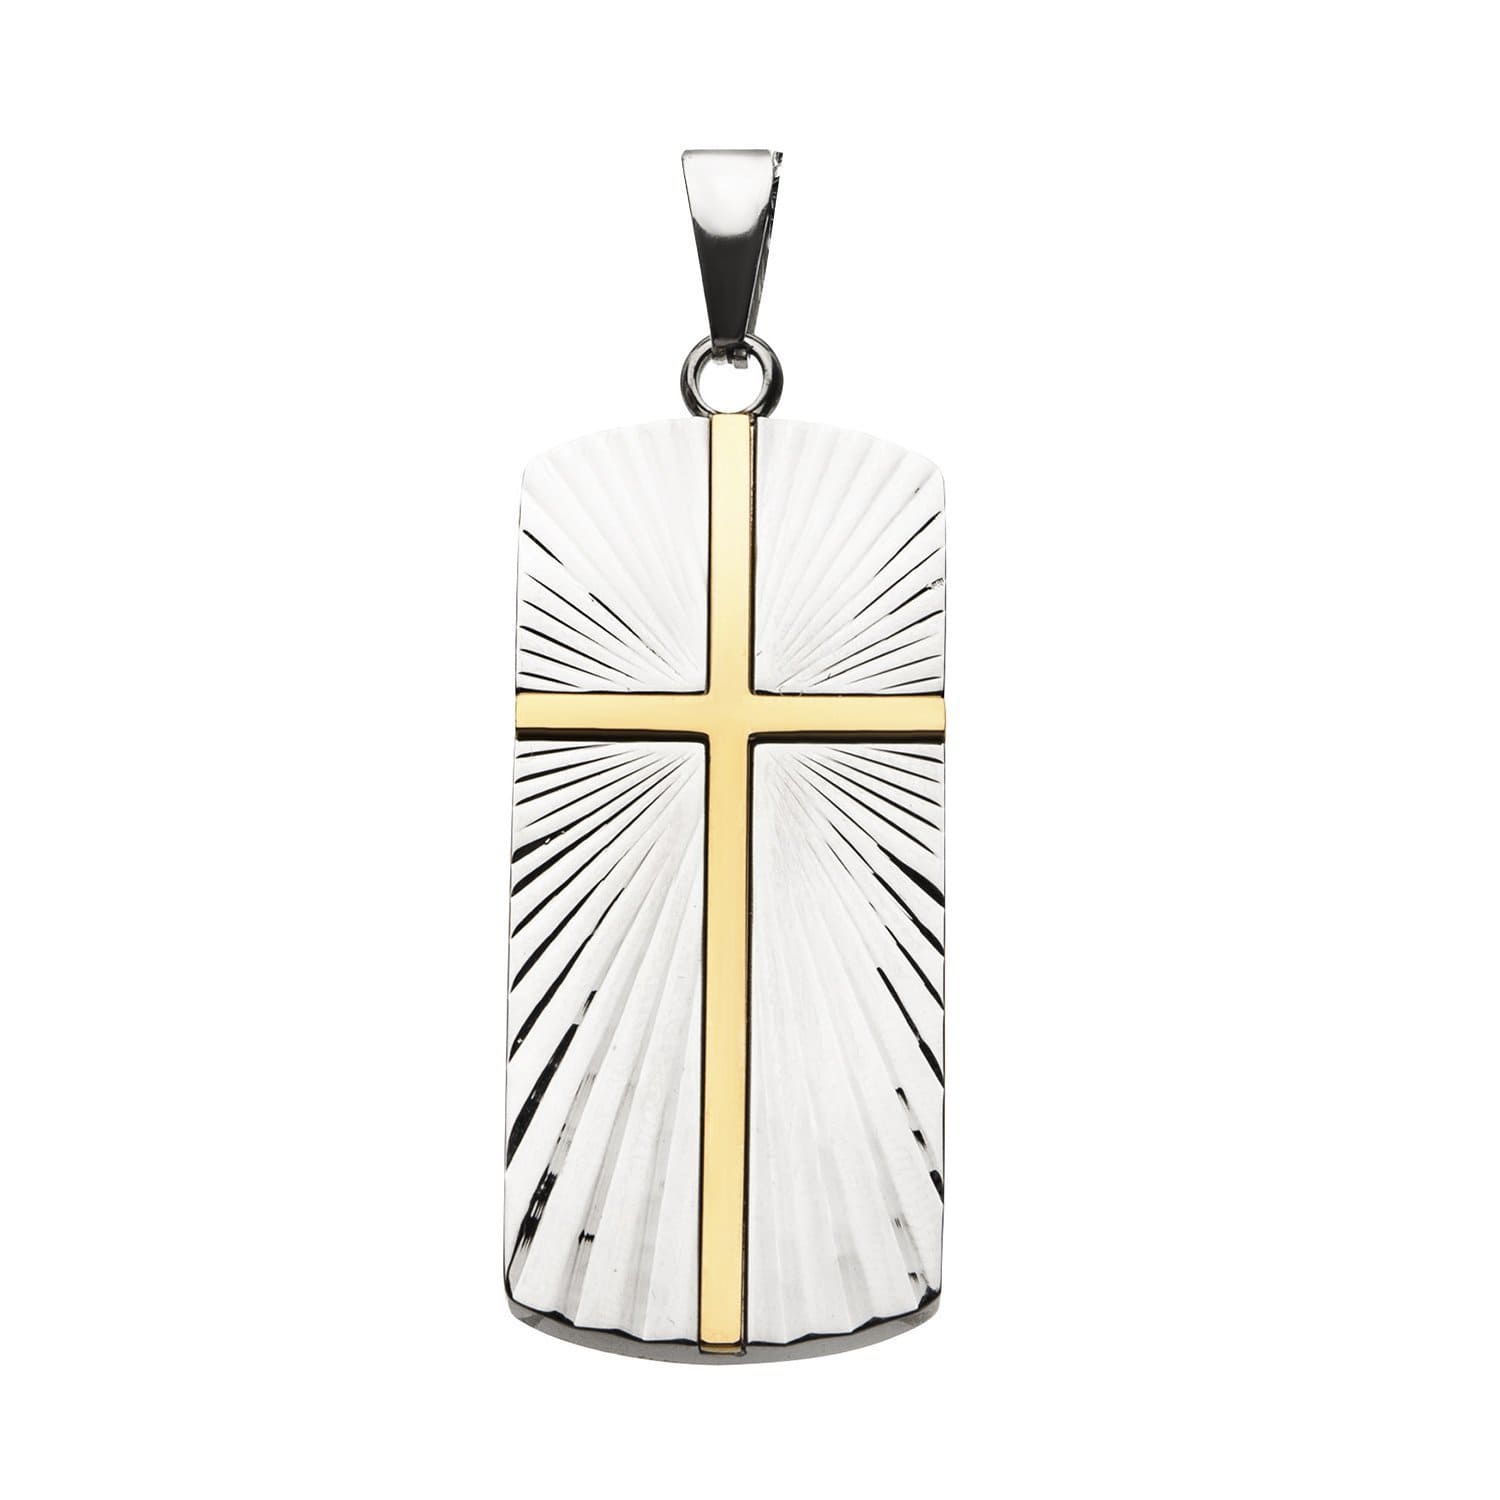 INOX JEWELRY Pendants Golden Tone and Silver Tone Stainless Steel Radiant Religious Cross Tag Pendant SSP21491GNK1